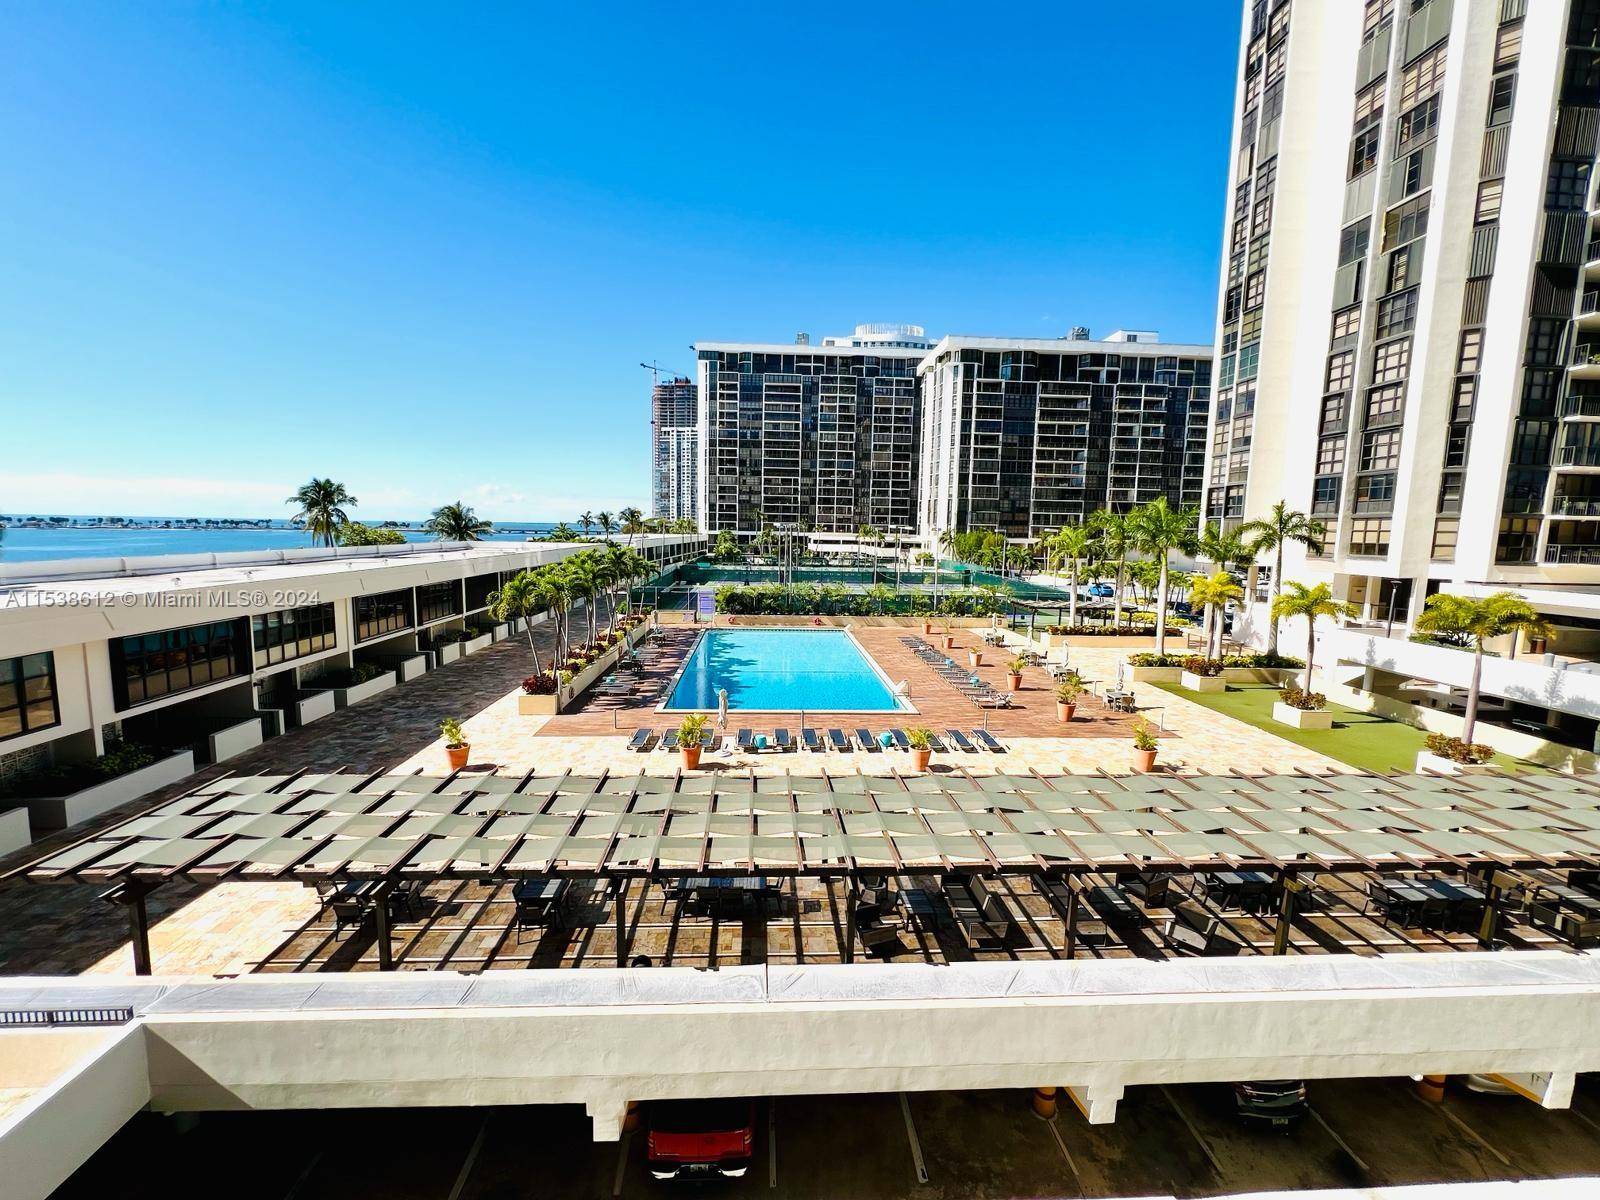 DIRECT OCEAN VIEW LARGE 2 BEDROOM 2 BATH IN THEDESIRABLE BRICKELL AVE 24 HRS SECURTY, AMENIIES TENNIS COURT GYM POOL MARINA.